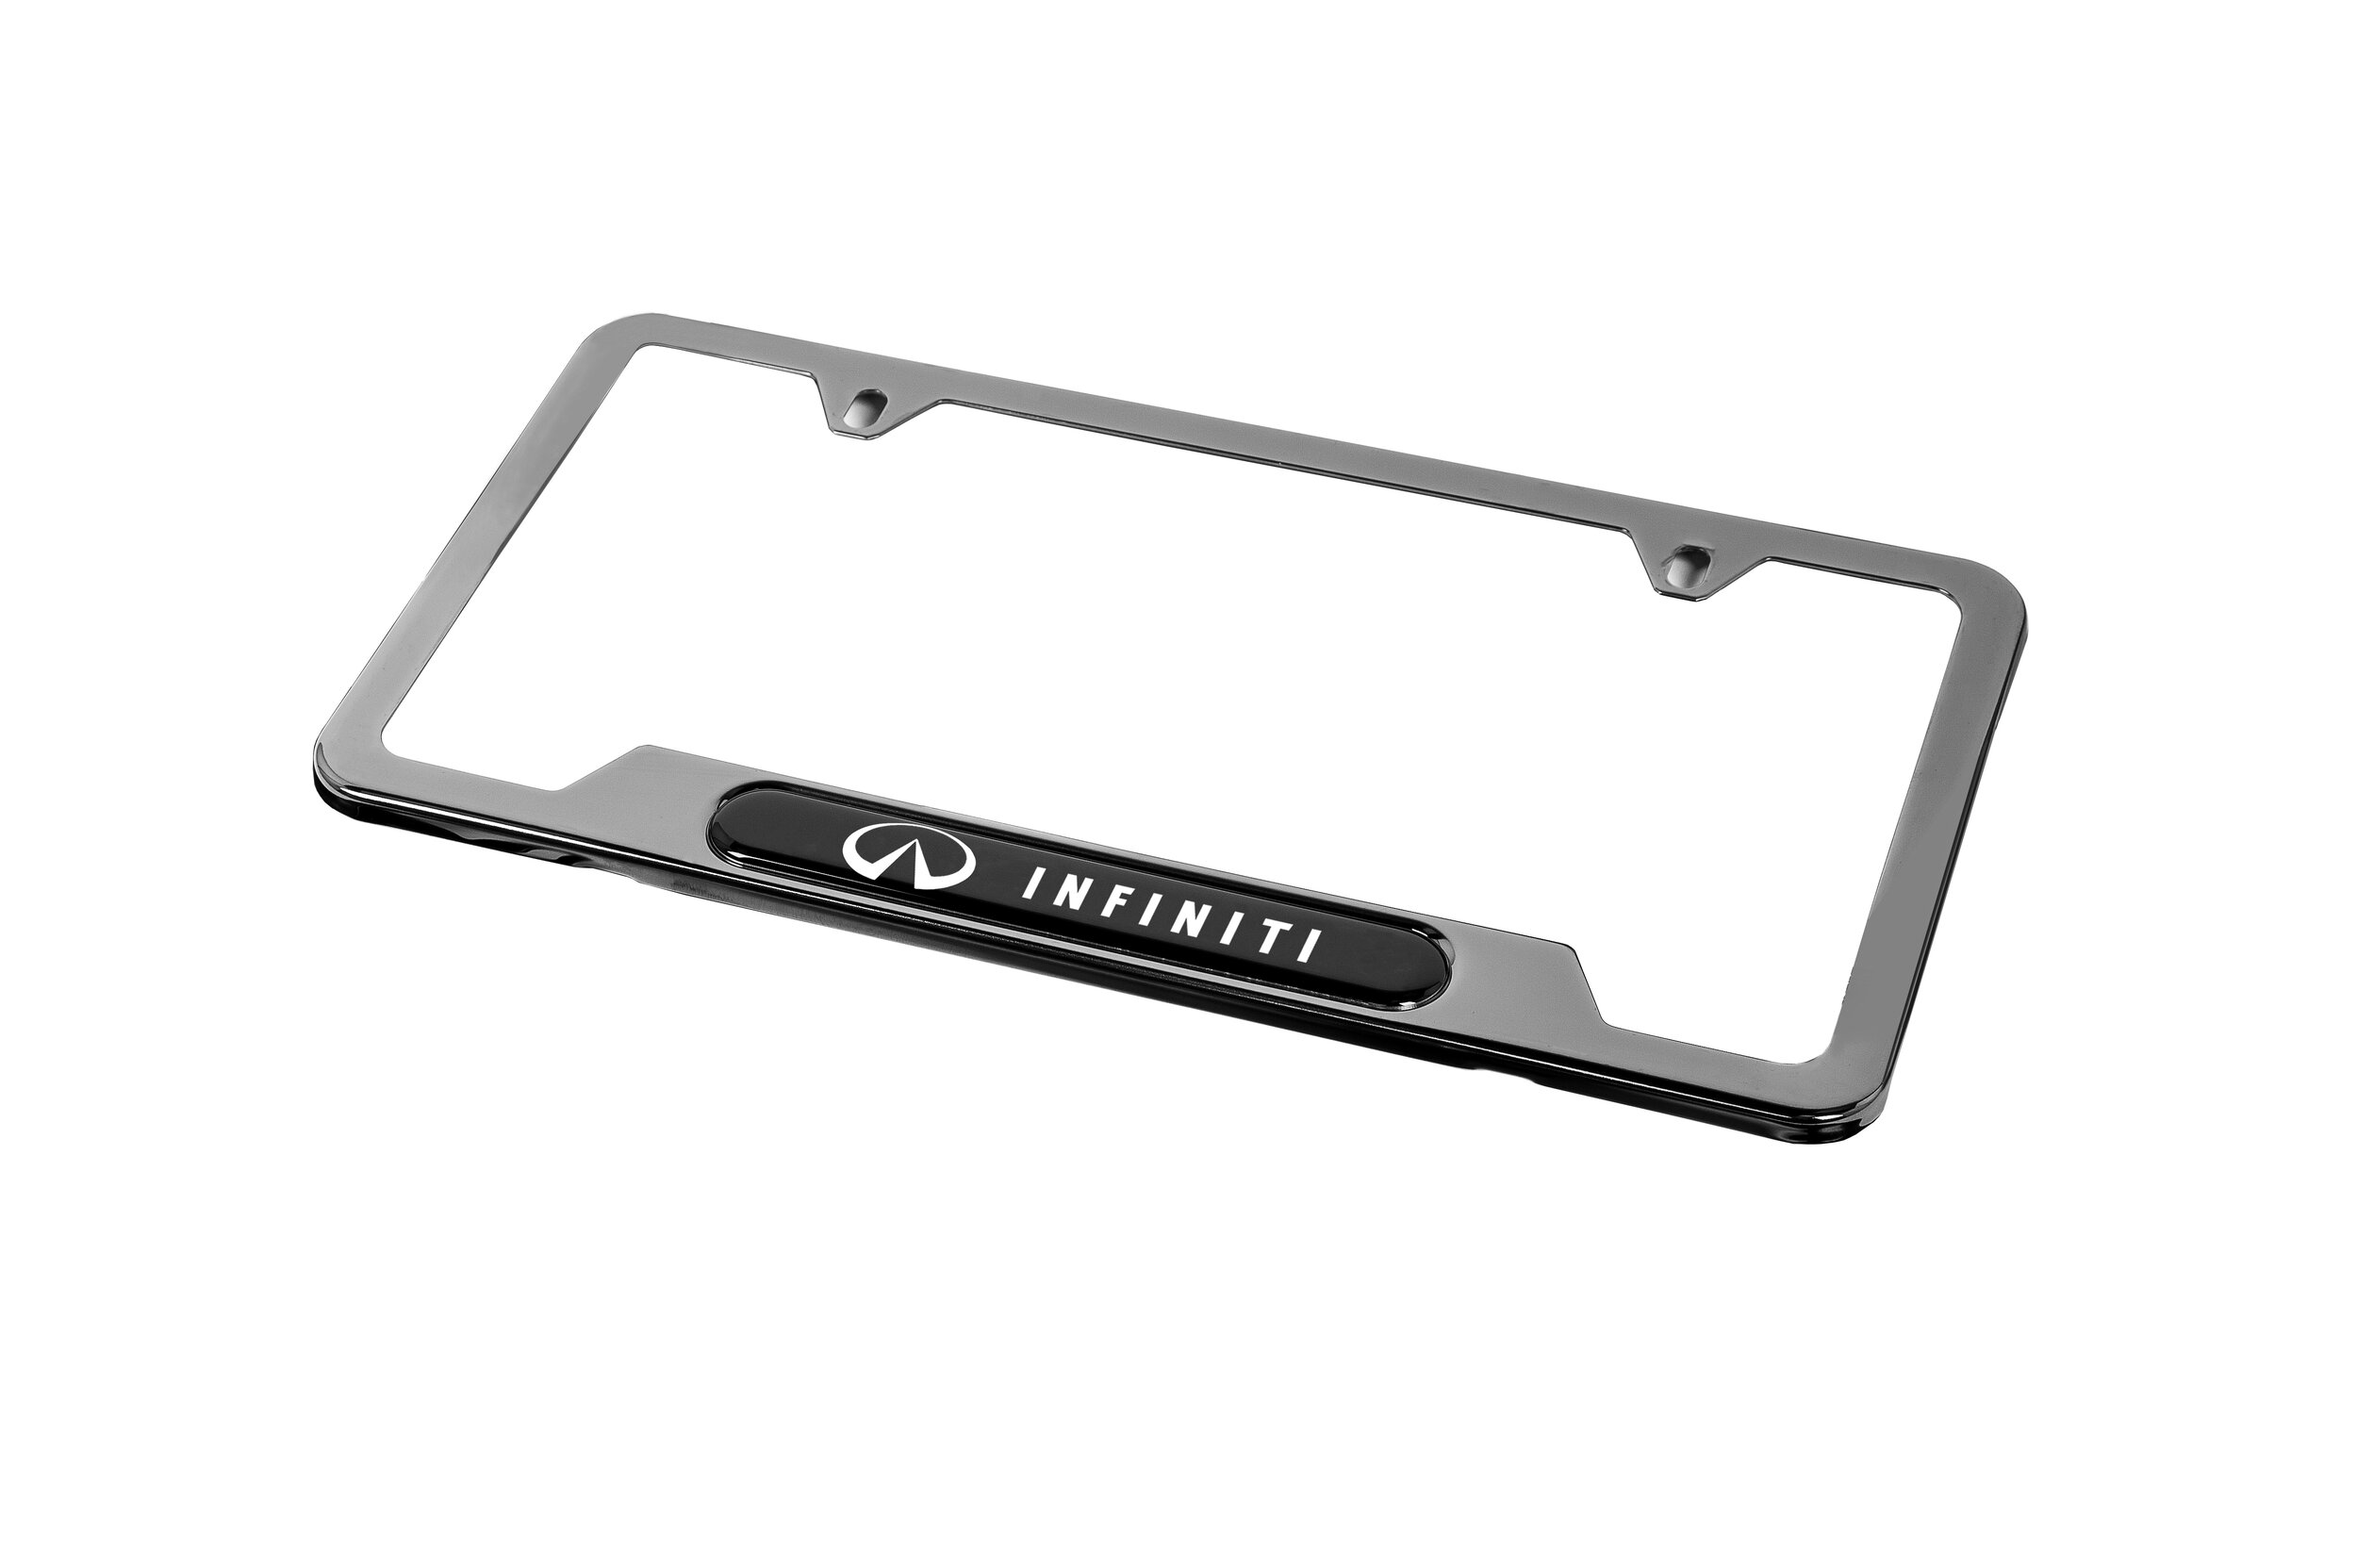 Fit Cadillac License Plate Cover Black Metal Sturdy License Plate Tag Compatible with Cadillac